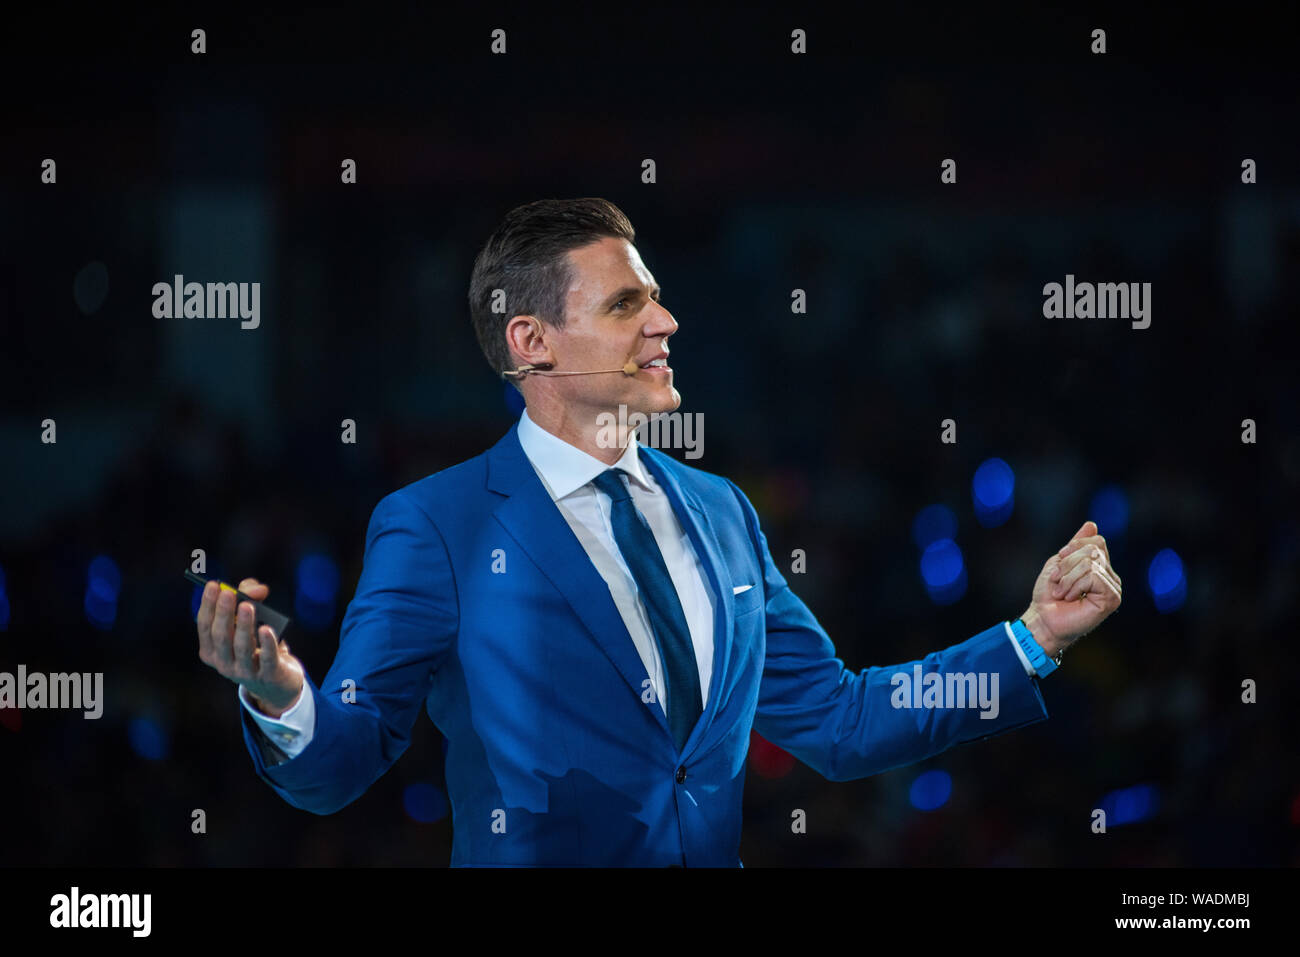 Nu Skin Enterprises president Ryan Napierski delivers a speech during an annual meeting in Shanghai, China, 13 July 2019. Stock Photo